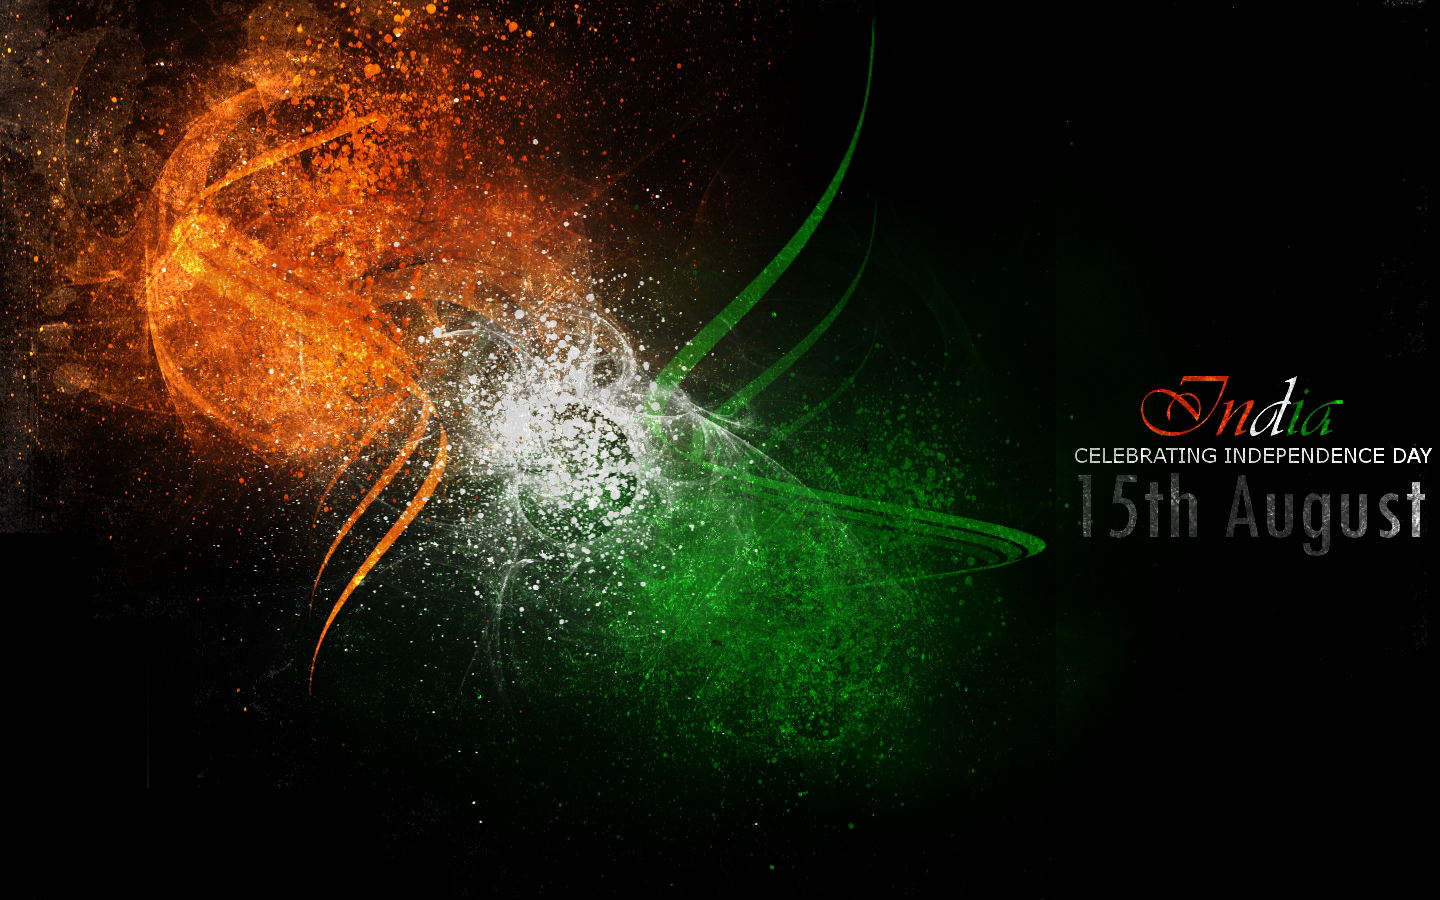 Happy Independence Day Clip Art, Timeline Cover Images for Facebook, Google  Plus 3D Pictures